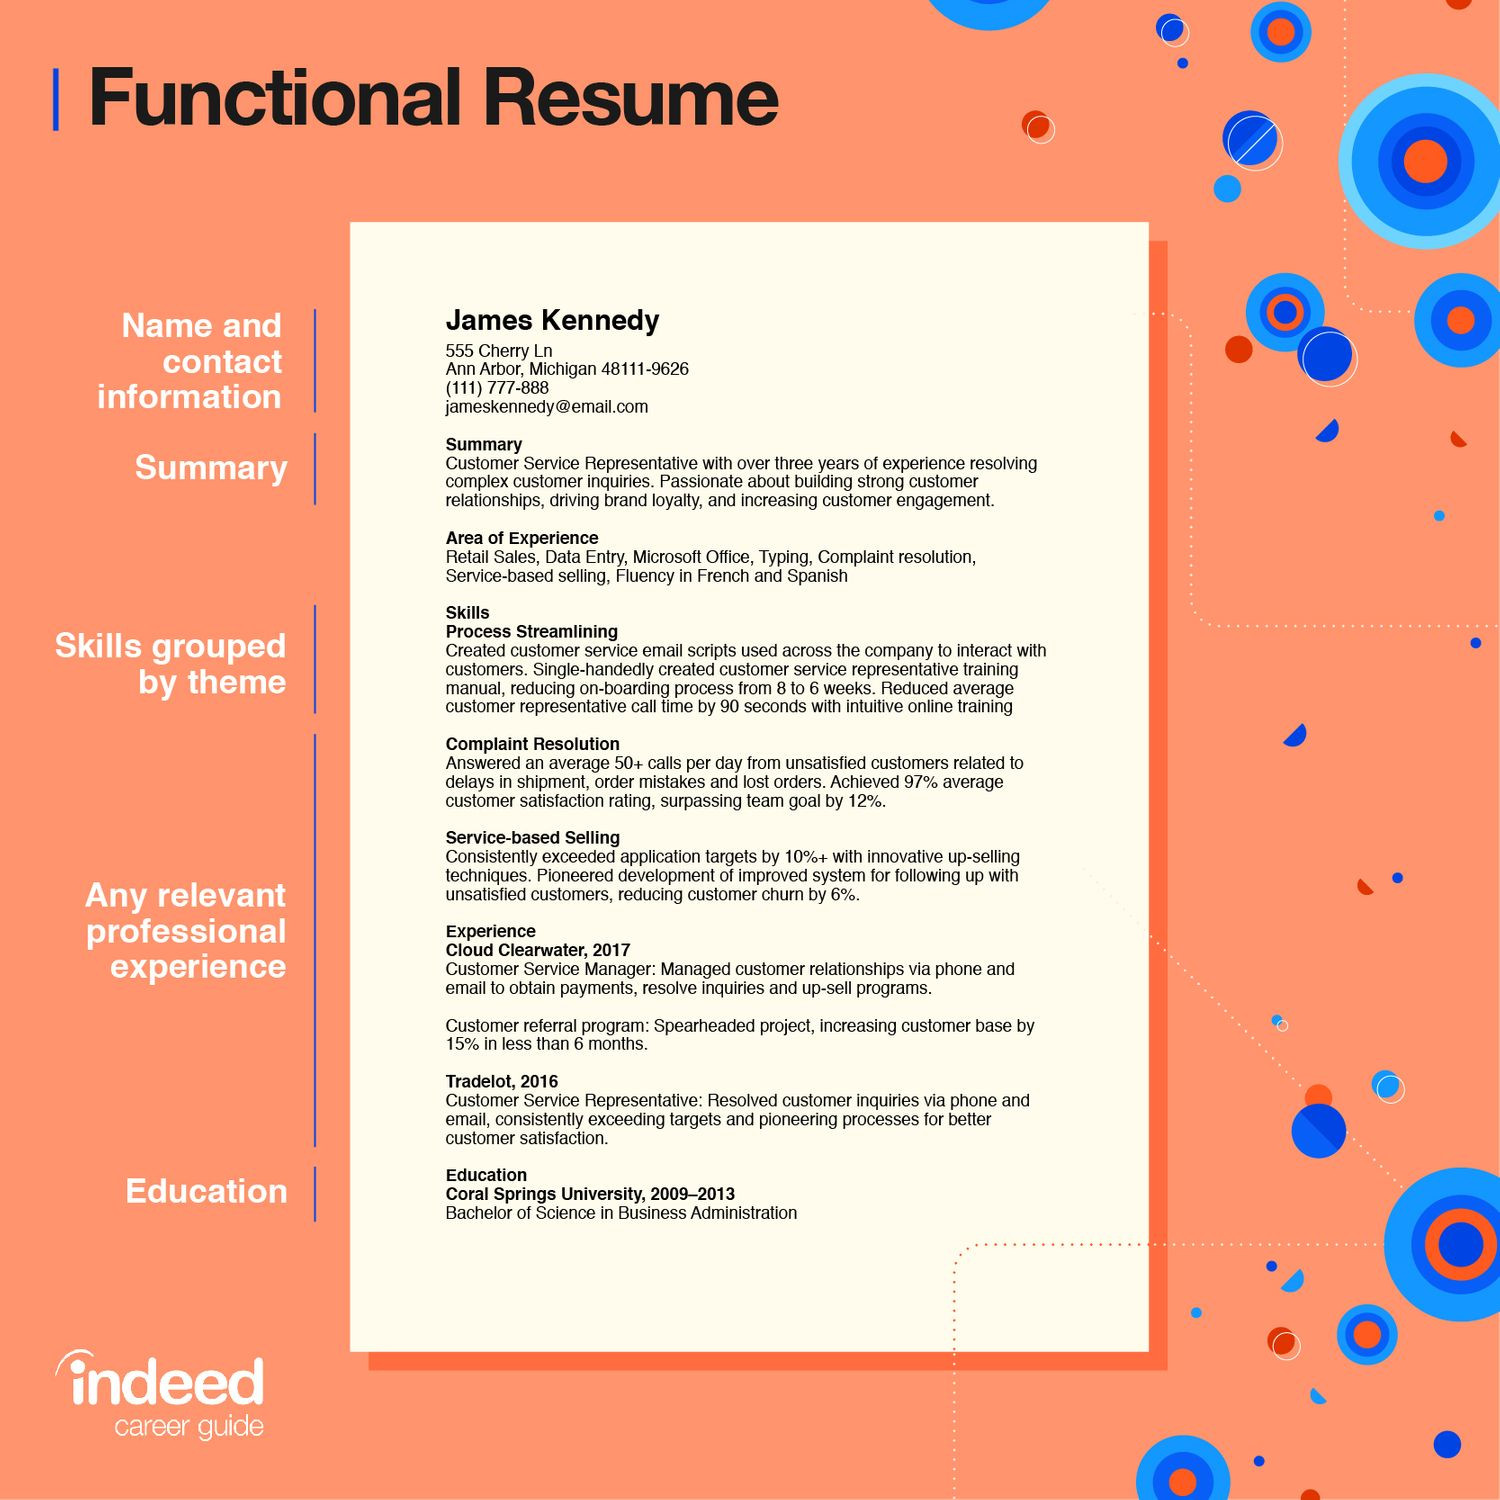 Sample Skills and Capabilities In Resume 17 Core Competencies to Include On Your Resume Indeed.com